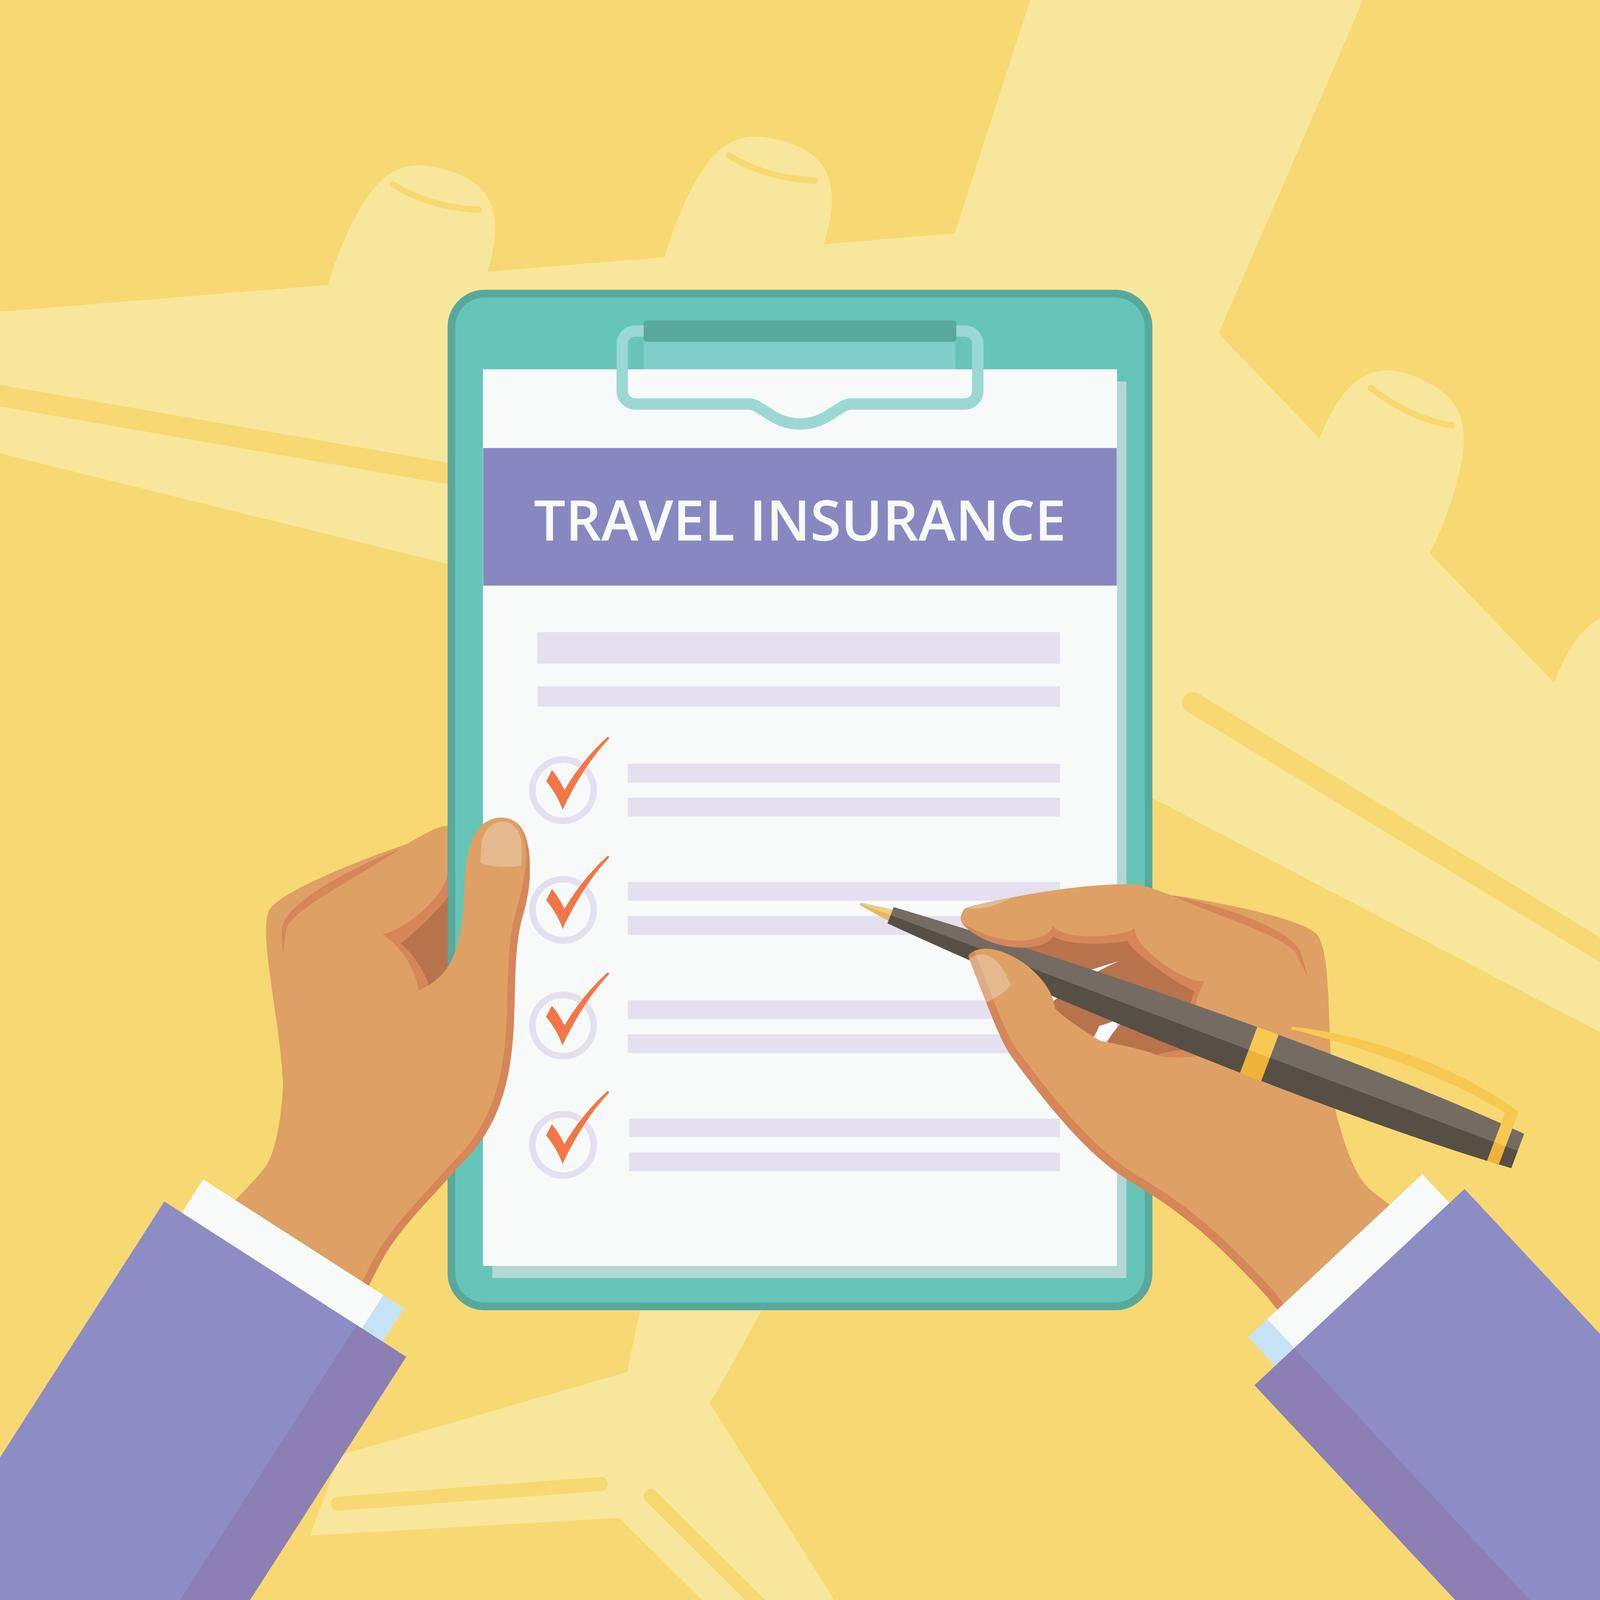 Travel insurance policy with hands on clipboard vector illustration. Vacation protection plan concept with insurance survey on clipboard, flat man hands filling travel policy on yellow background